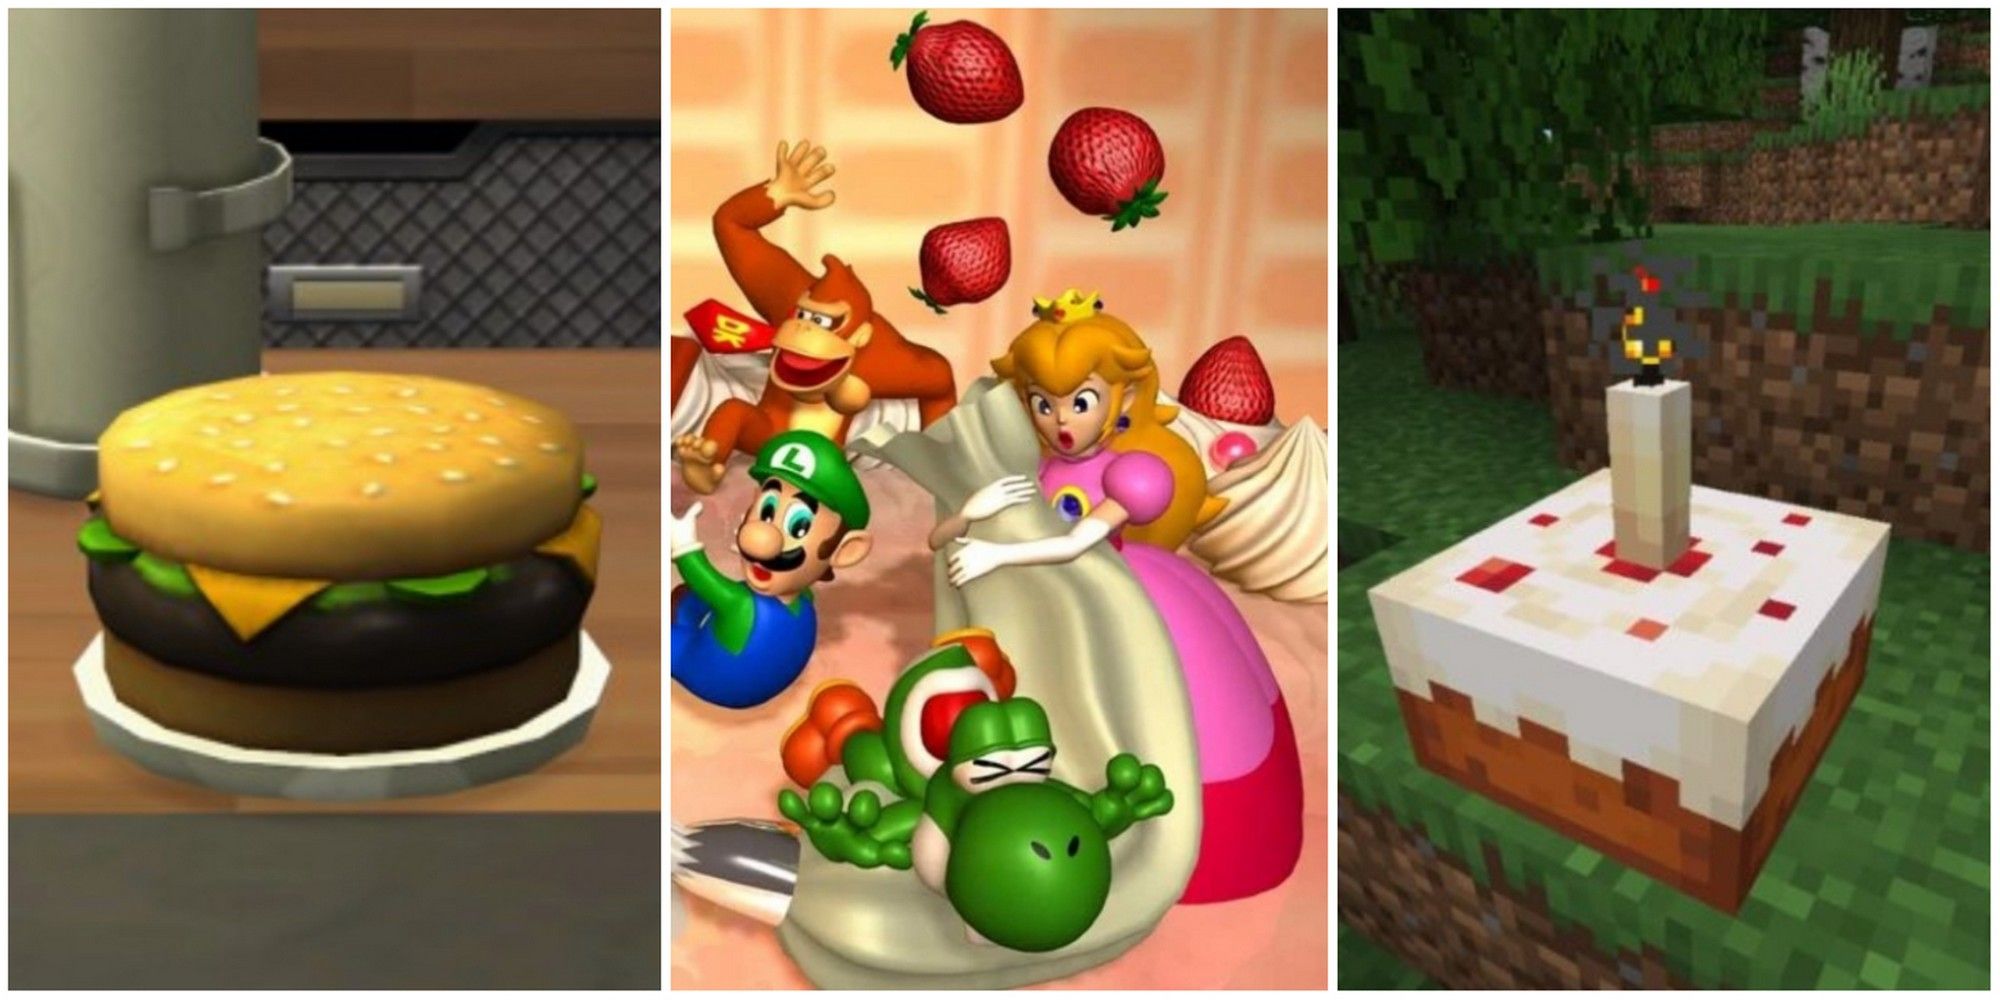 feature cakes in gaming sims hamburger cake peachs birthday cake minecrat candle cake